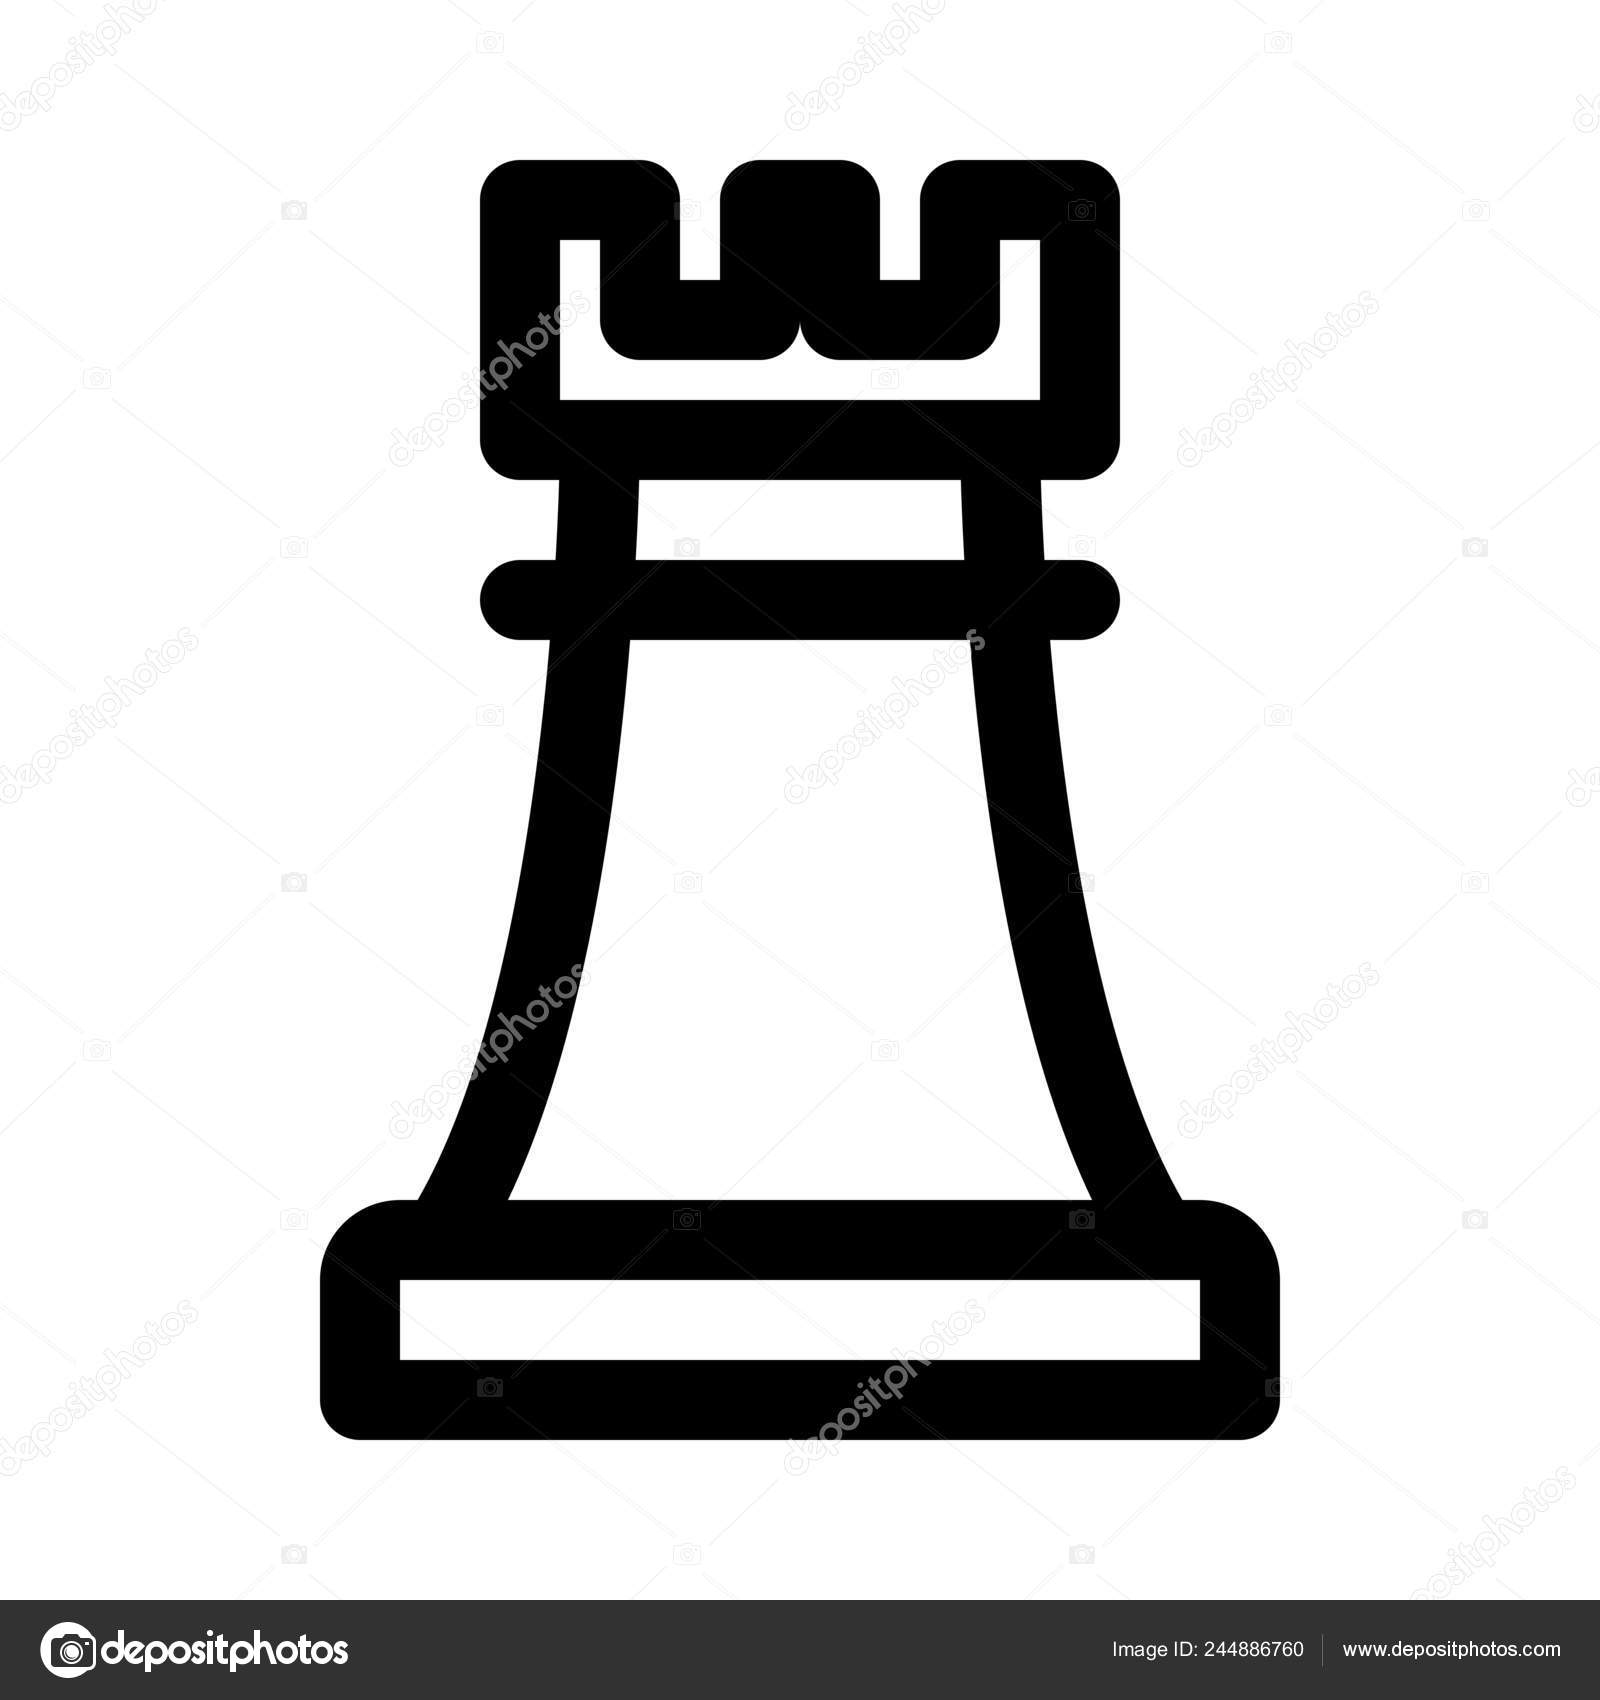 Chess rook, illustration - Stock Image - F037/4927 - Science Photo